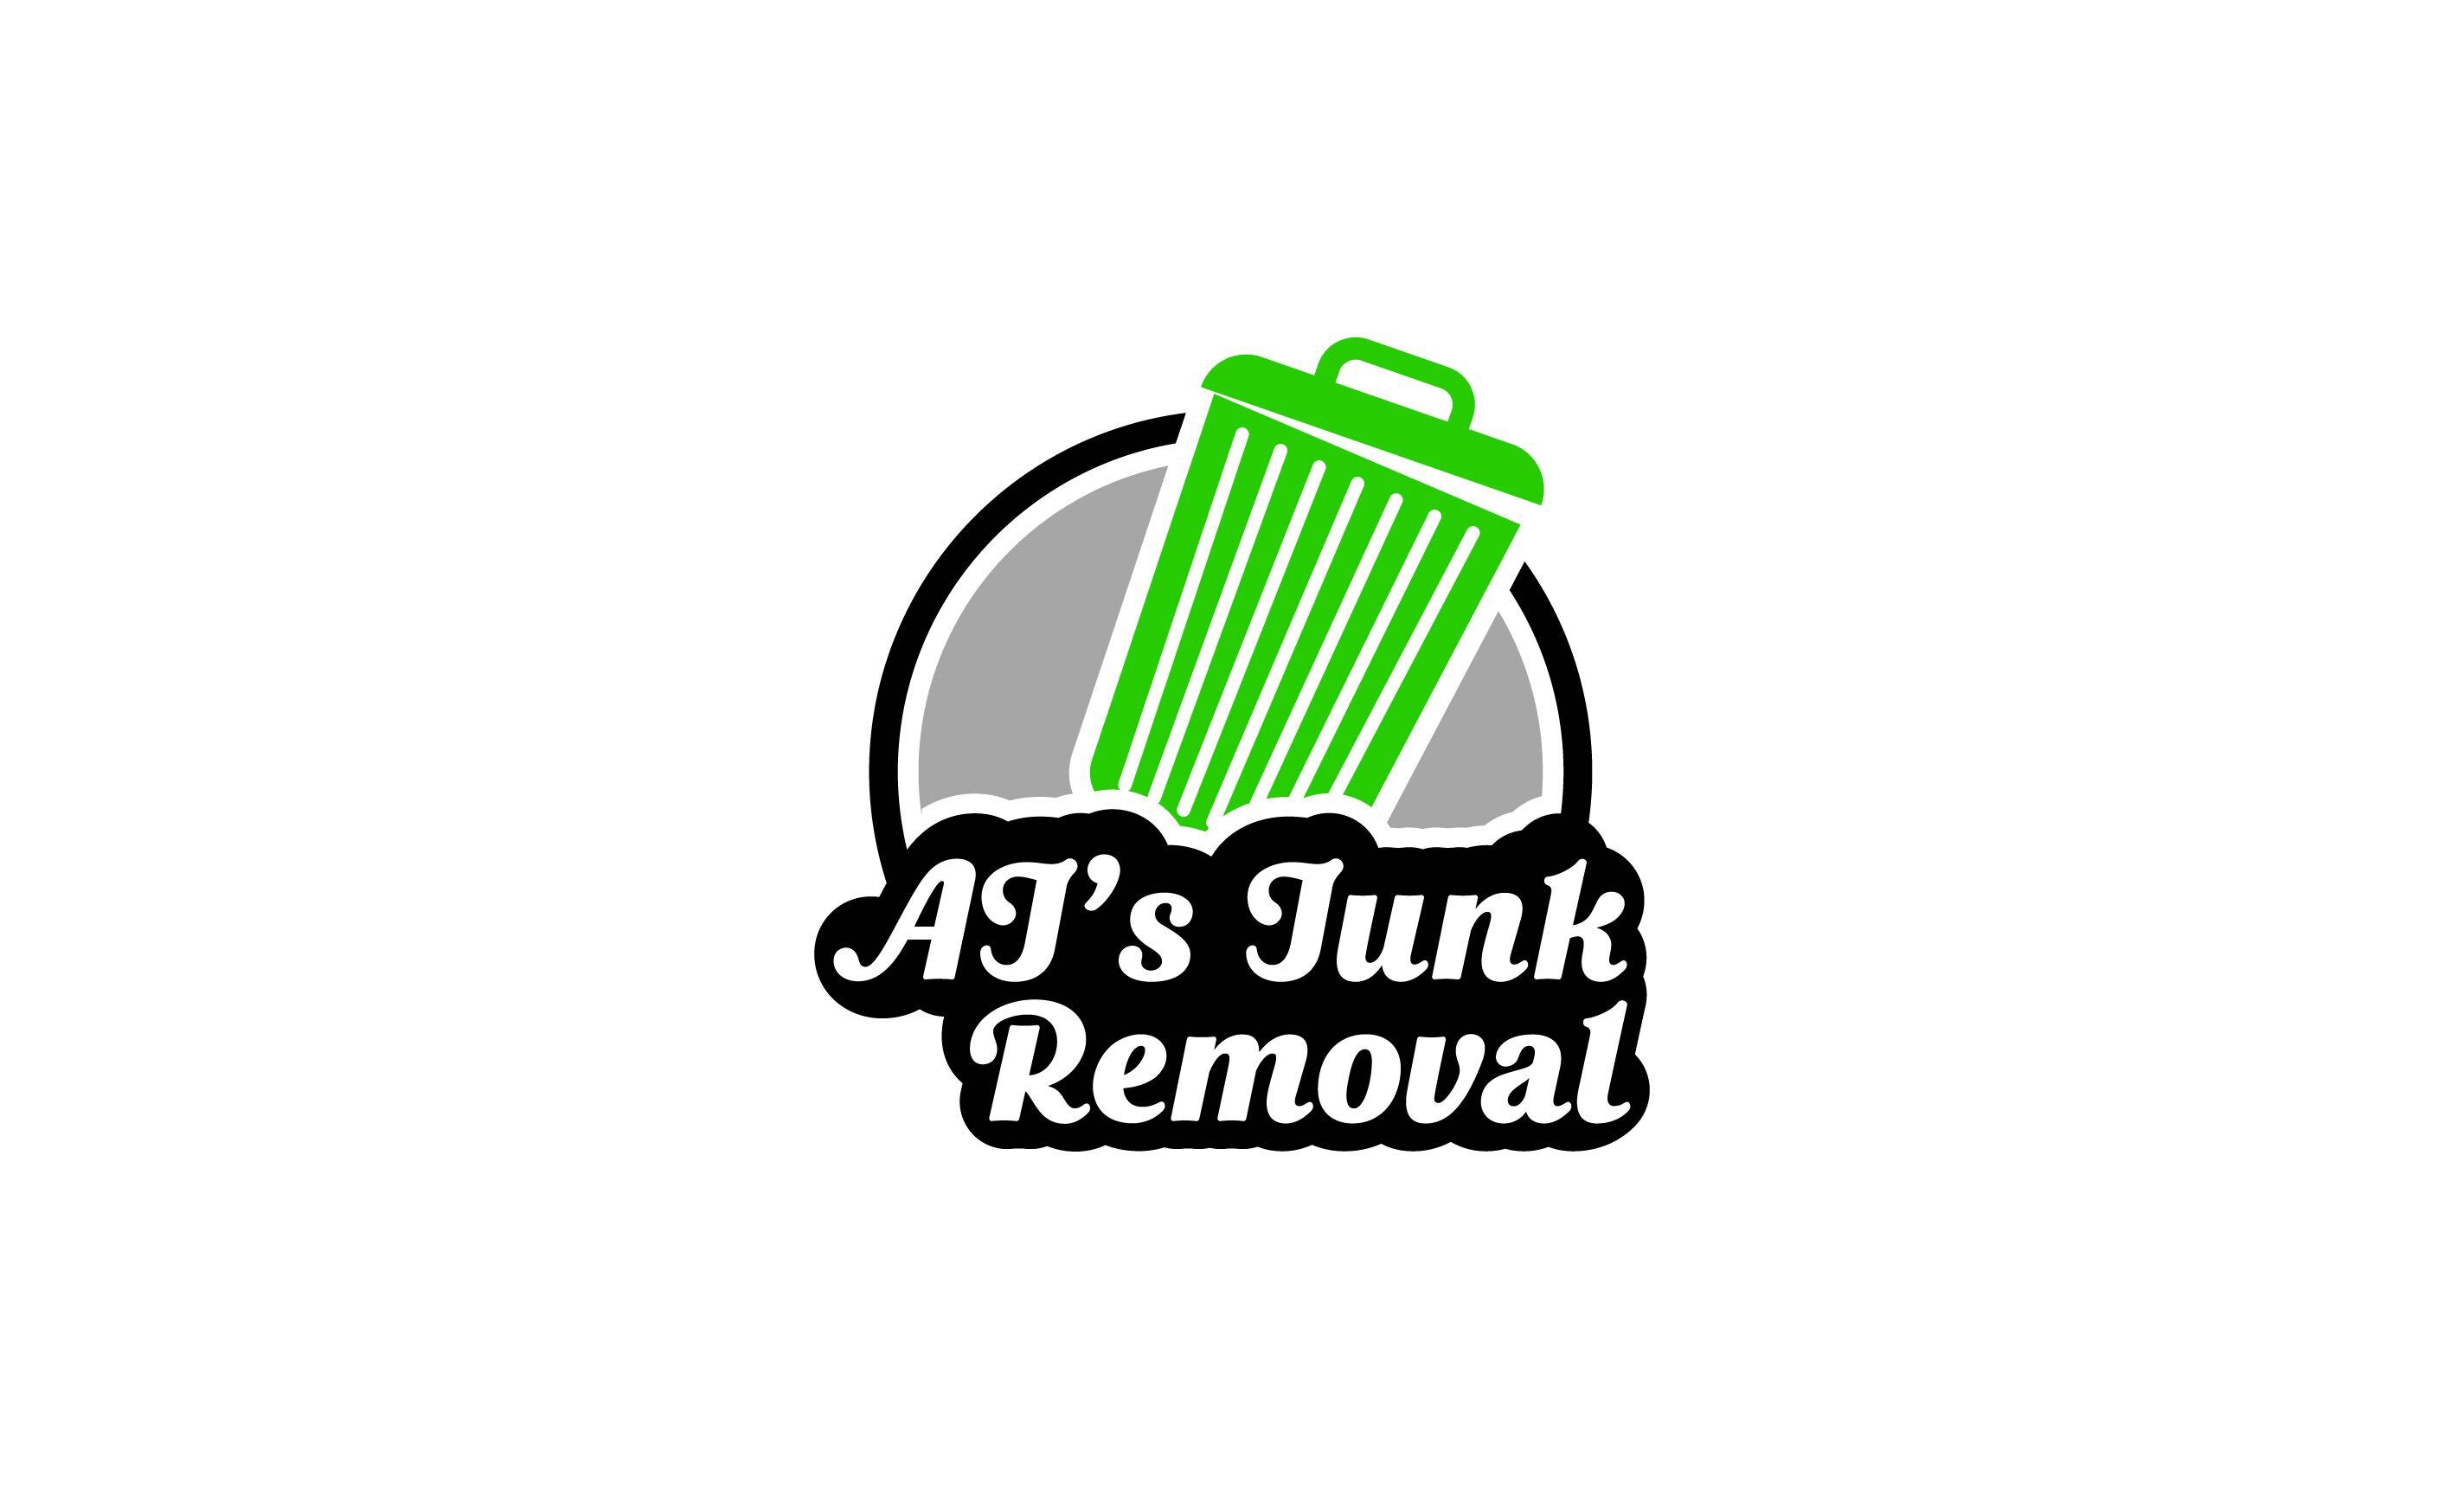 AJ's Junk Removal logo depicting a clean and professional junk removal service in Norwalk.